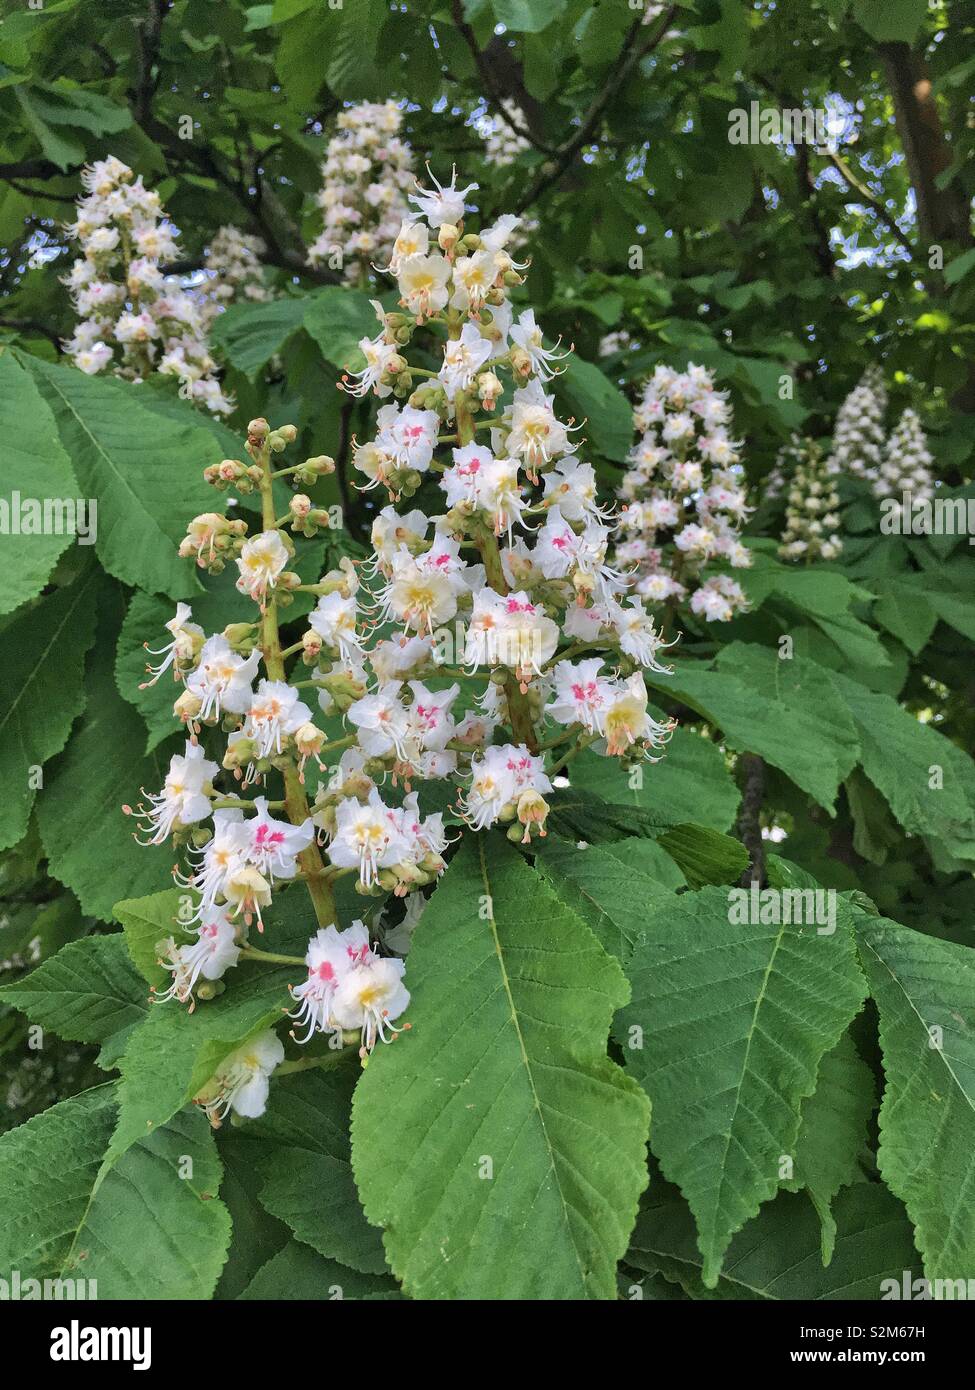 A horse chestnut (Aesculus hippocastanum) tree in flower. Stock Photo